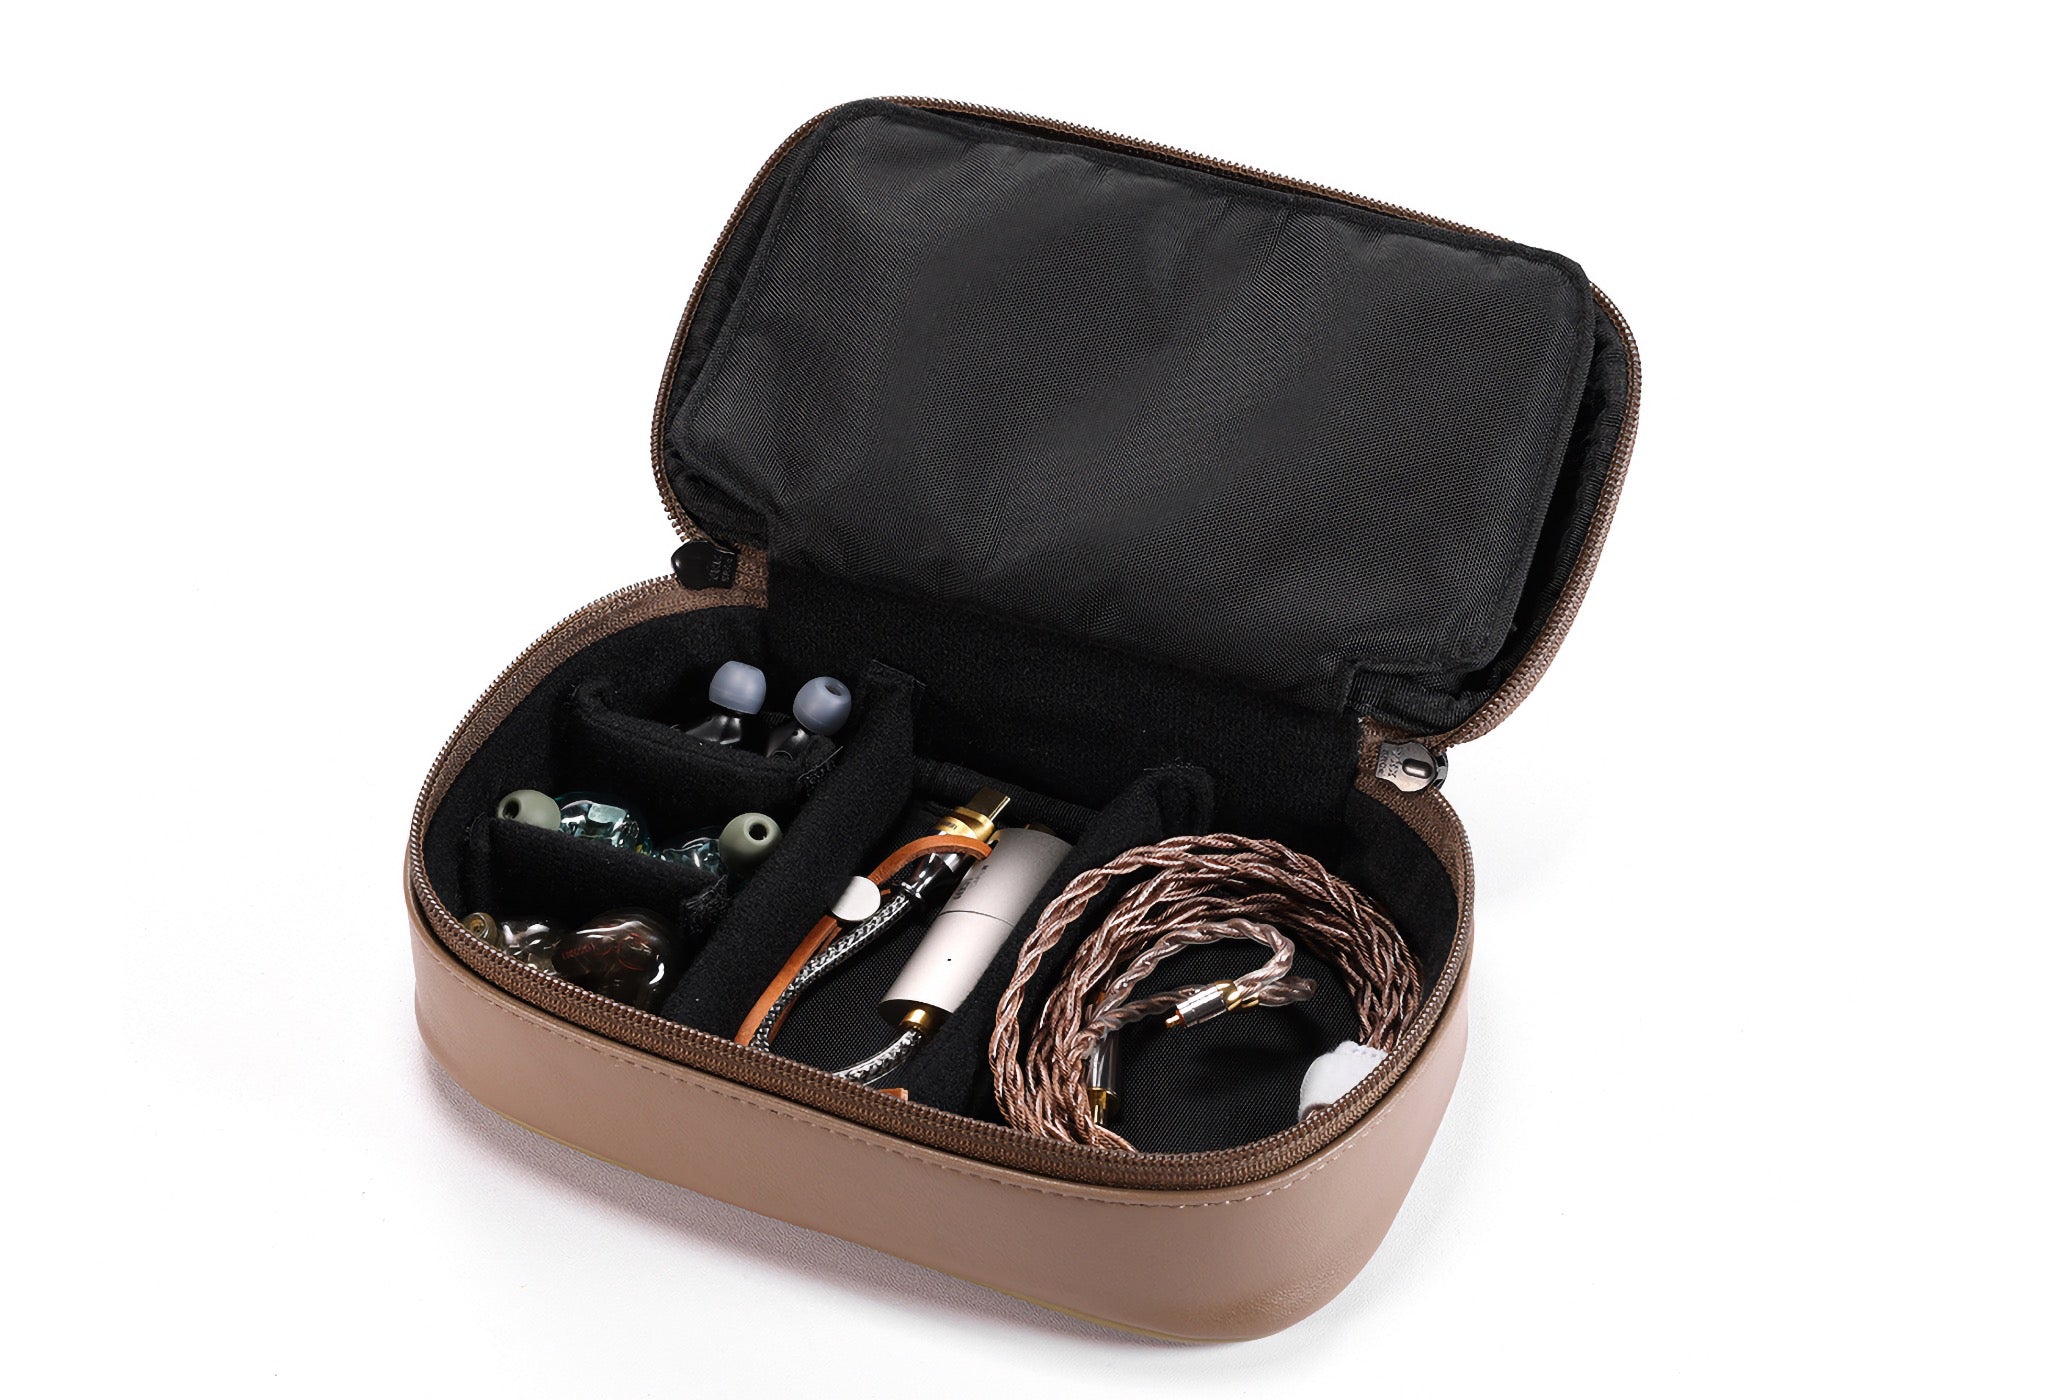 ddHiFi CZ180 with open lid revealing IEMs, cables and dongles in separate compartments